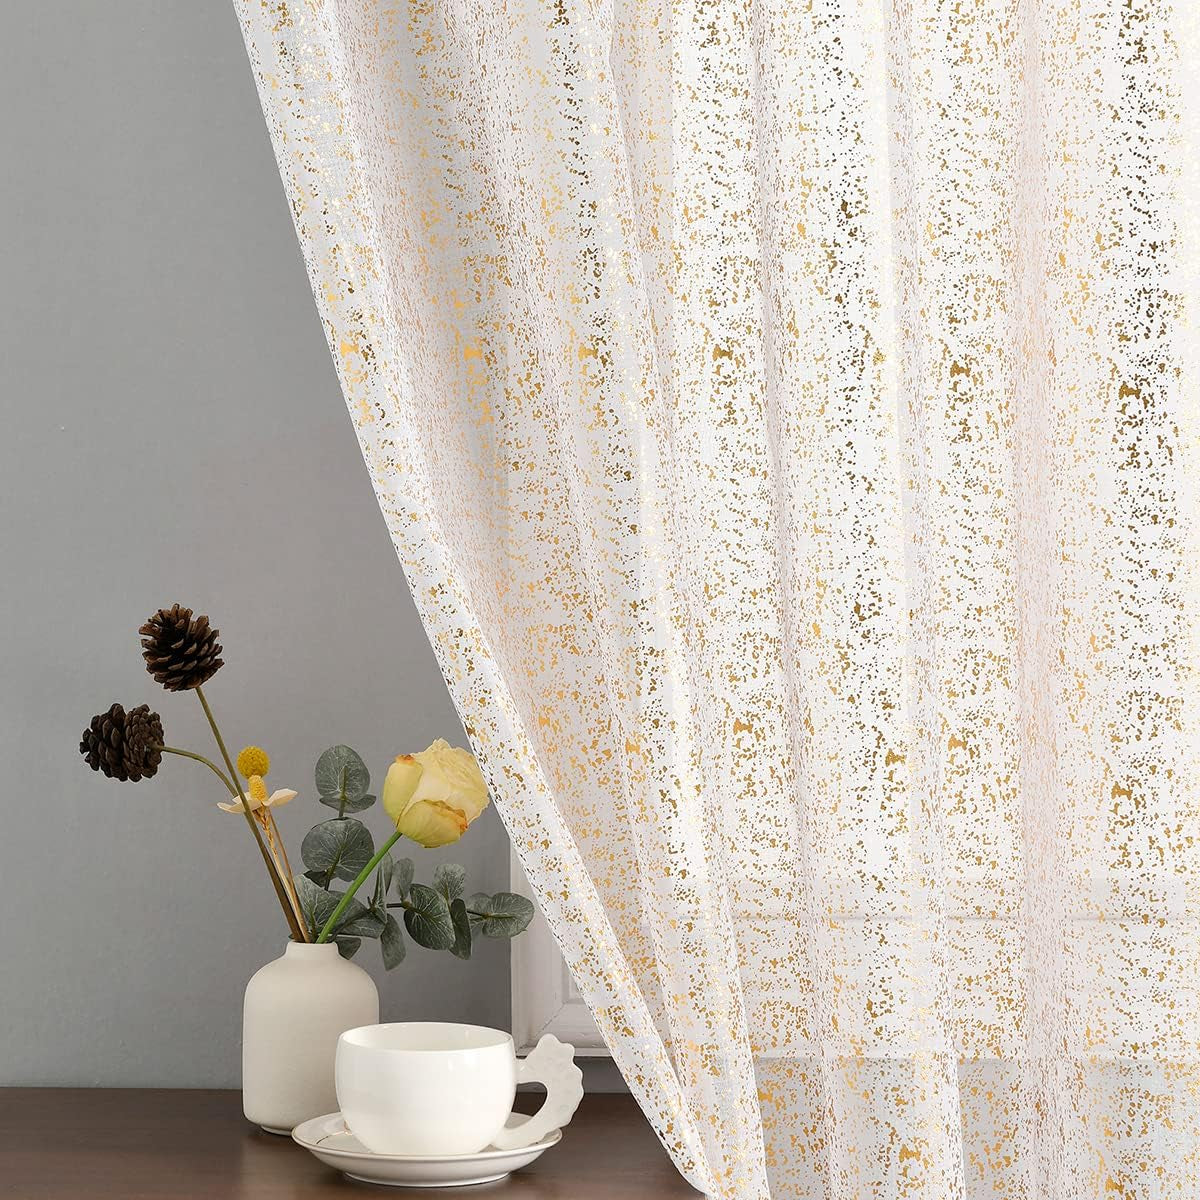 Silver Sheer Curtains 84 Inch Long - Chic Sparkle Curtains for Living Room, Rod Pocket Glitter Sheer Curtains for Windows Privacy Silver Grey Sheer Panels, 52 X 84 Inch, 2 Panels, Silver Gray  TERLYTEX Gold White W52 X L84 Inch|Pair 